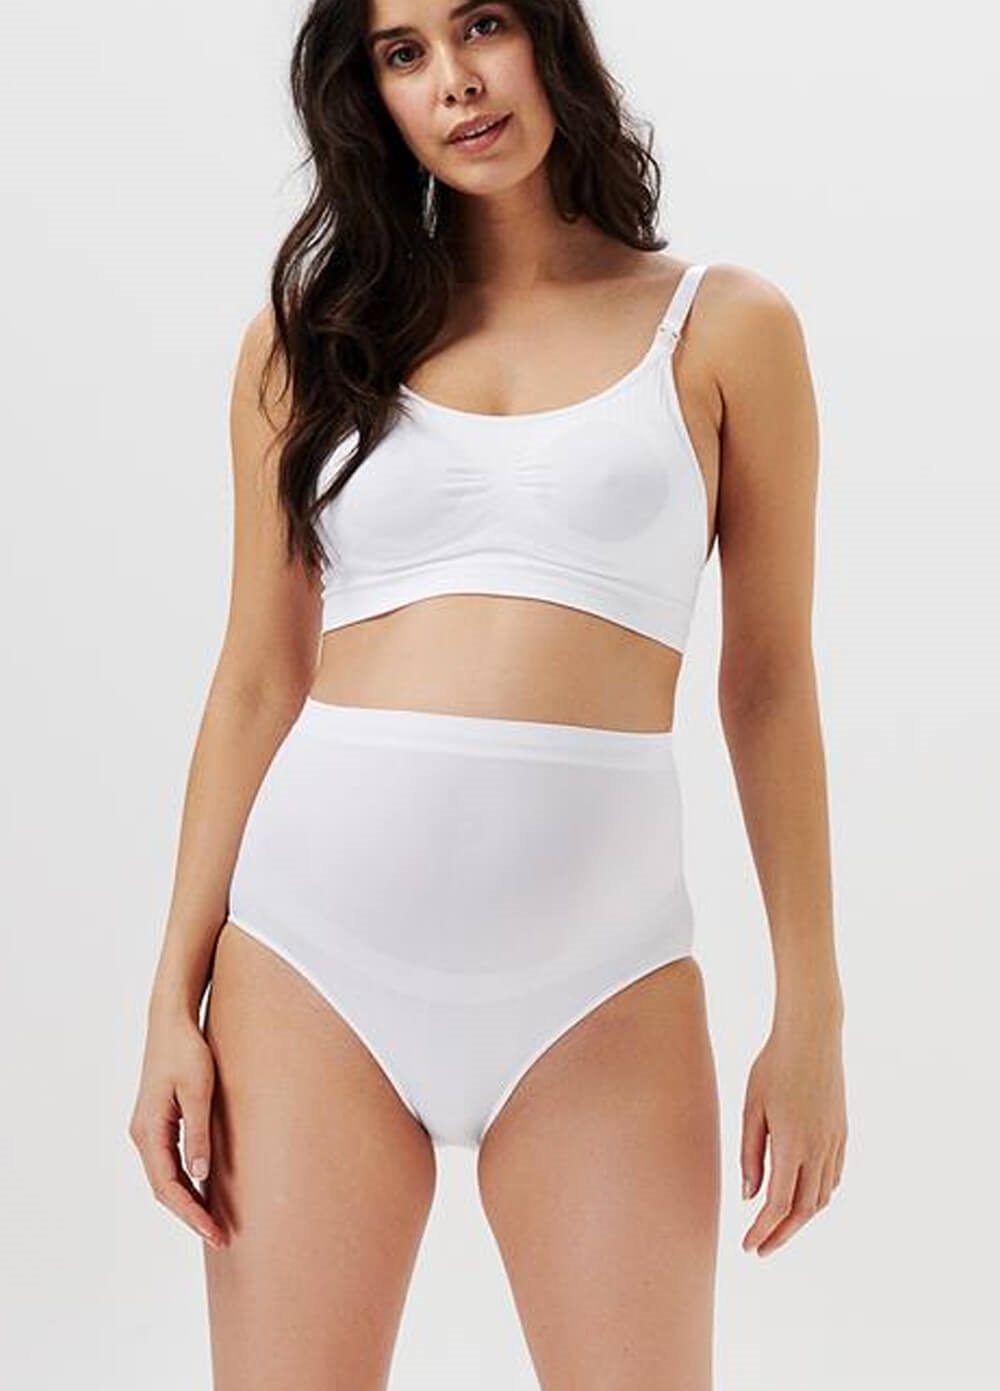 Seamless Over Belly Maternity Briefs in White by Noppies | Queen Bee